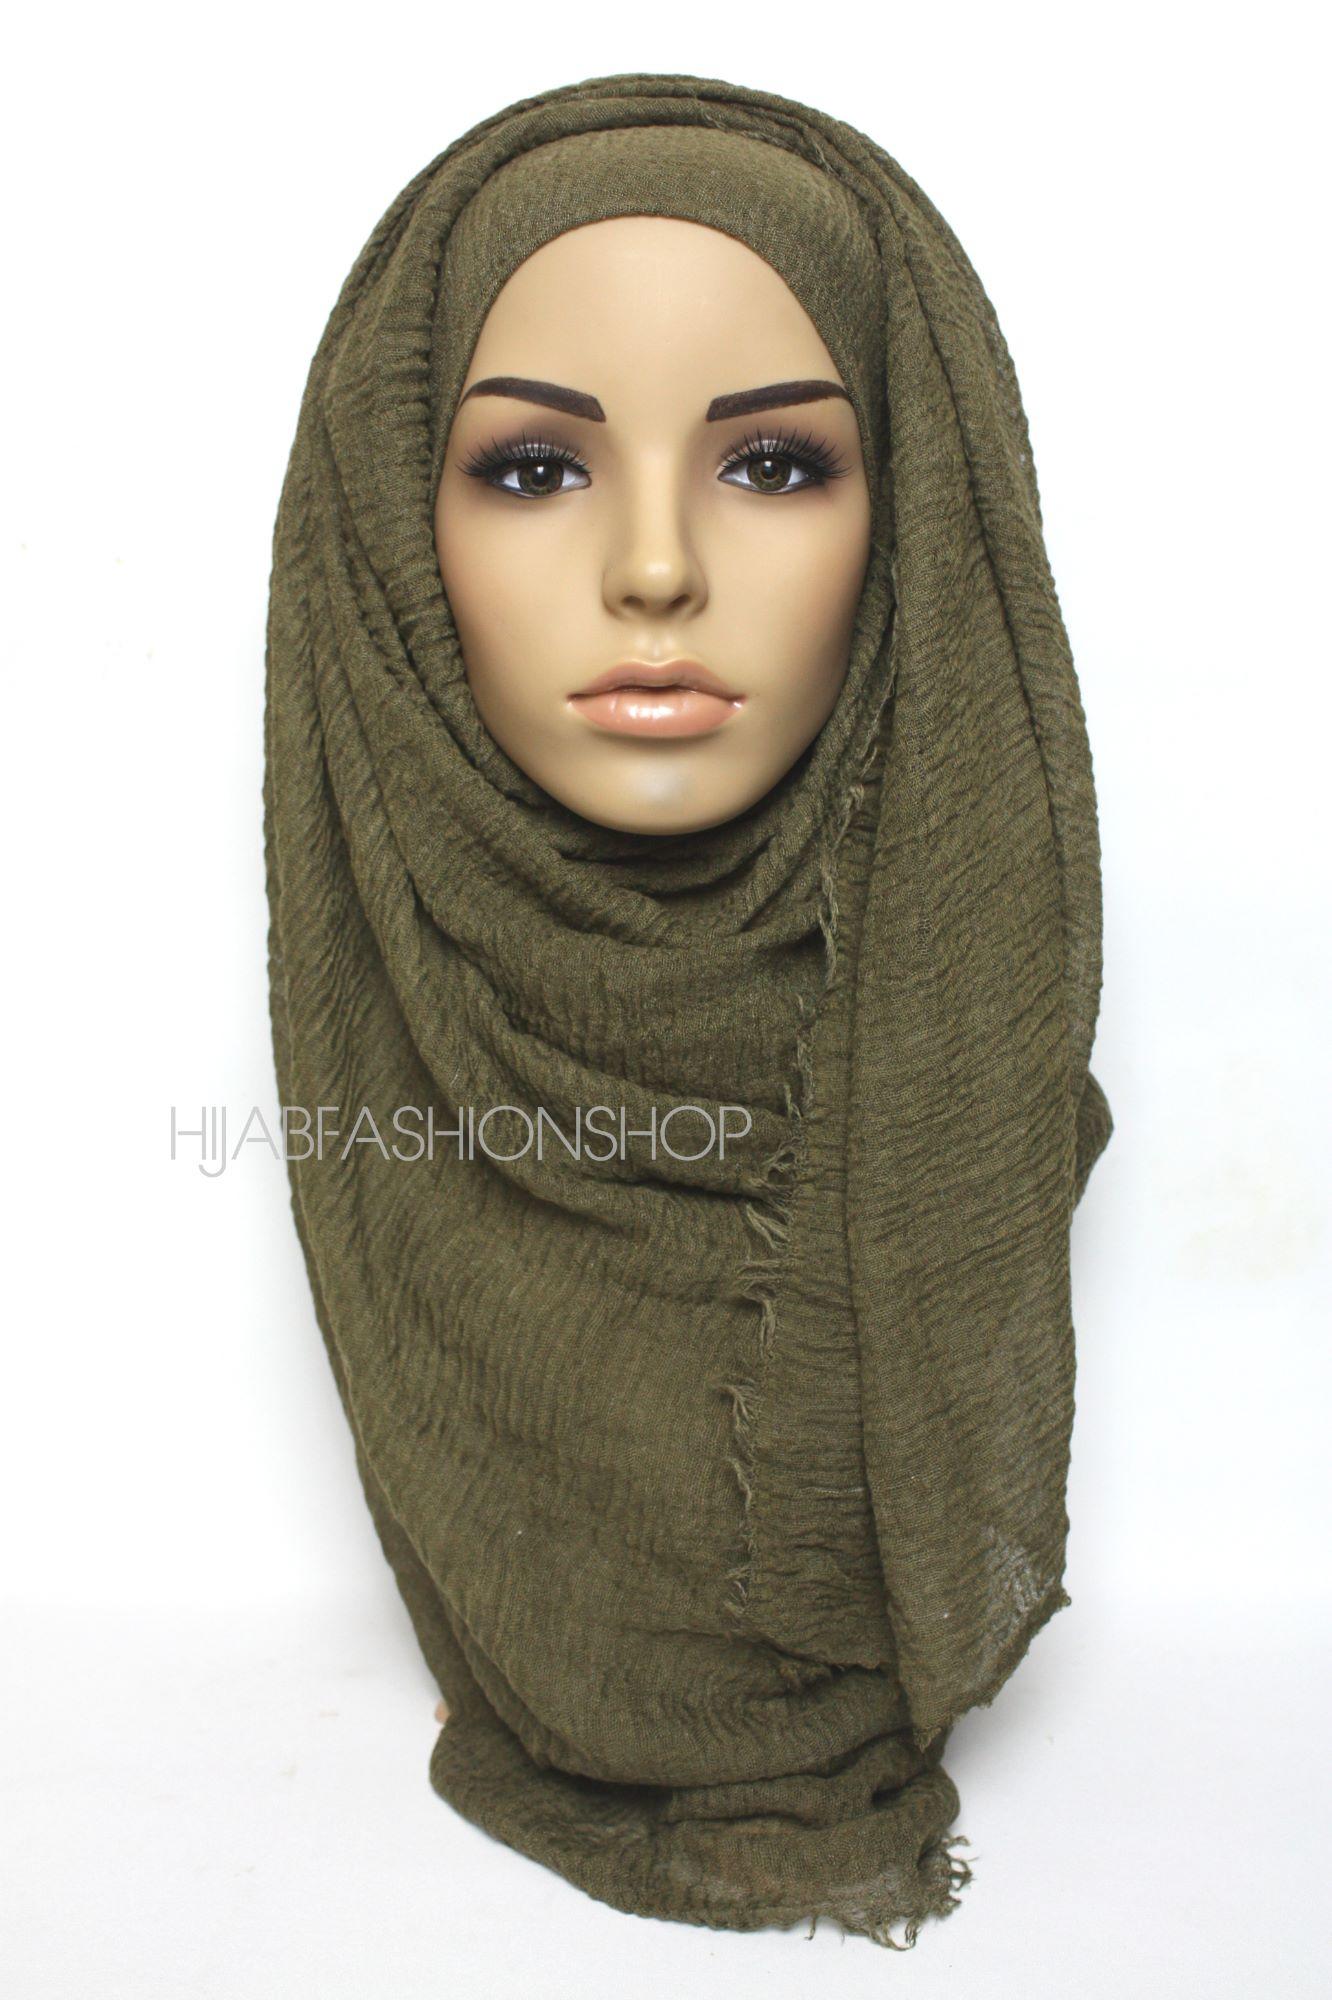 White Snow Army Green Premium Crimple Crimp Hijab Scarf with Frayed Edges